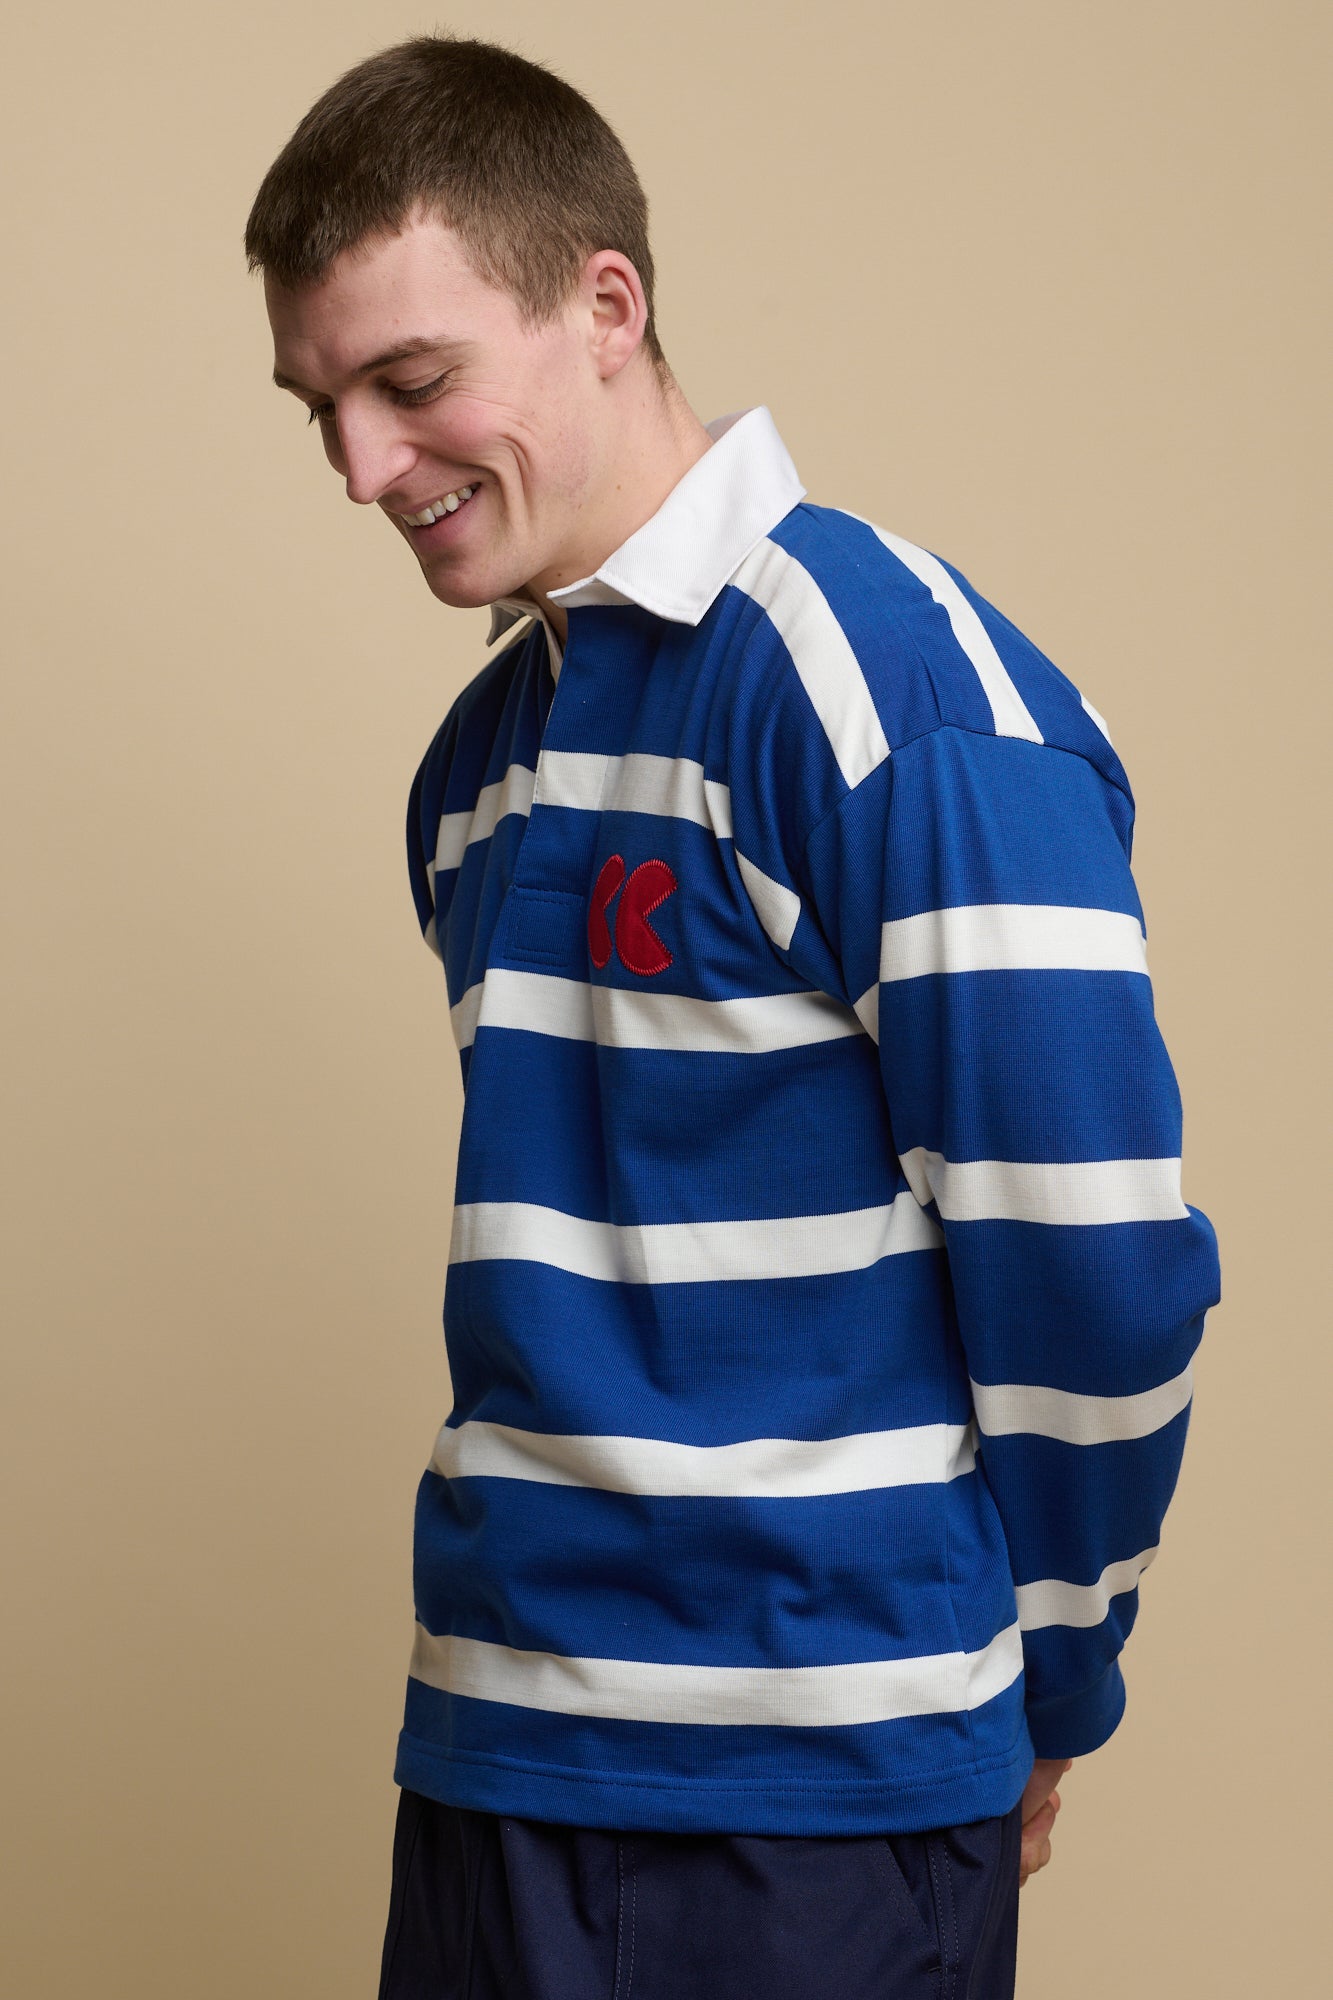 Thigh up image of smiley, brunet male wearing stripe logo rugby shirt in blue and white with red CC logo patch on chest